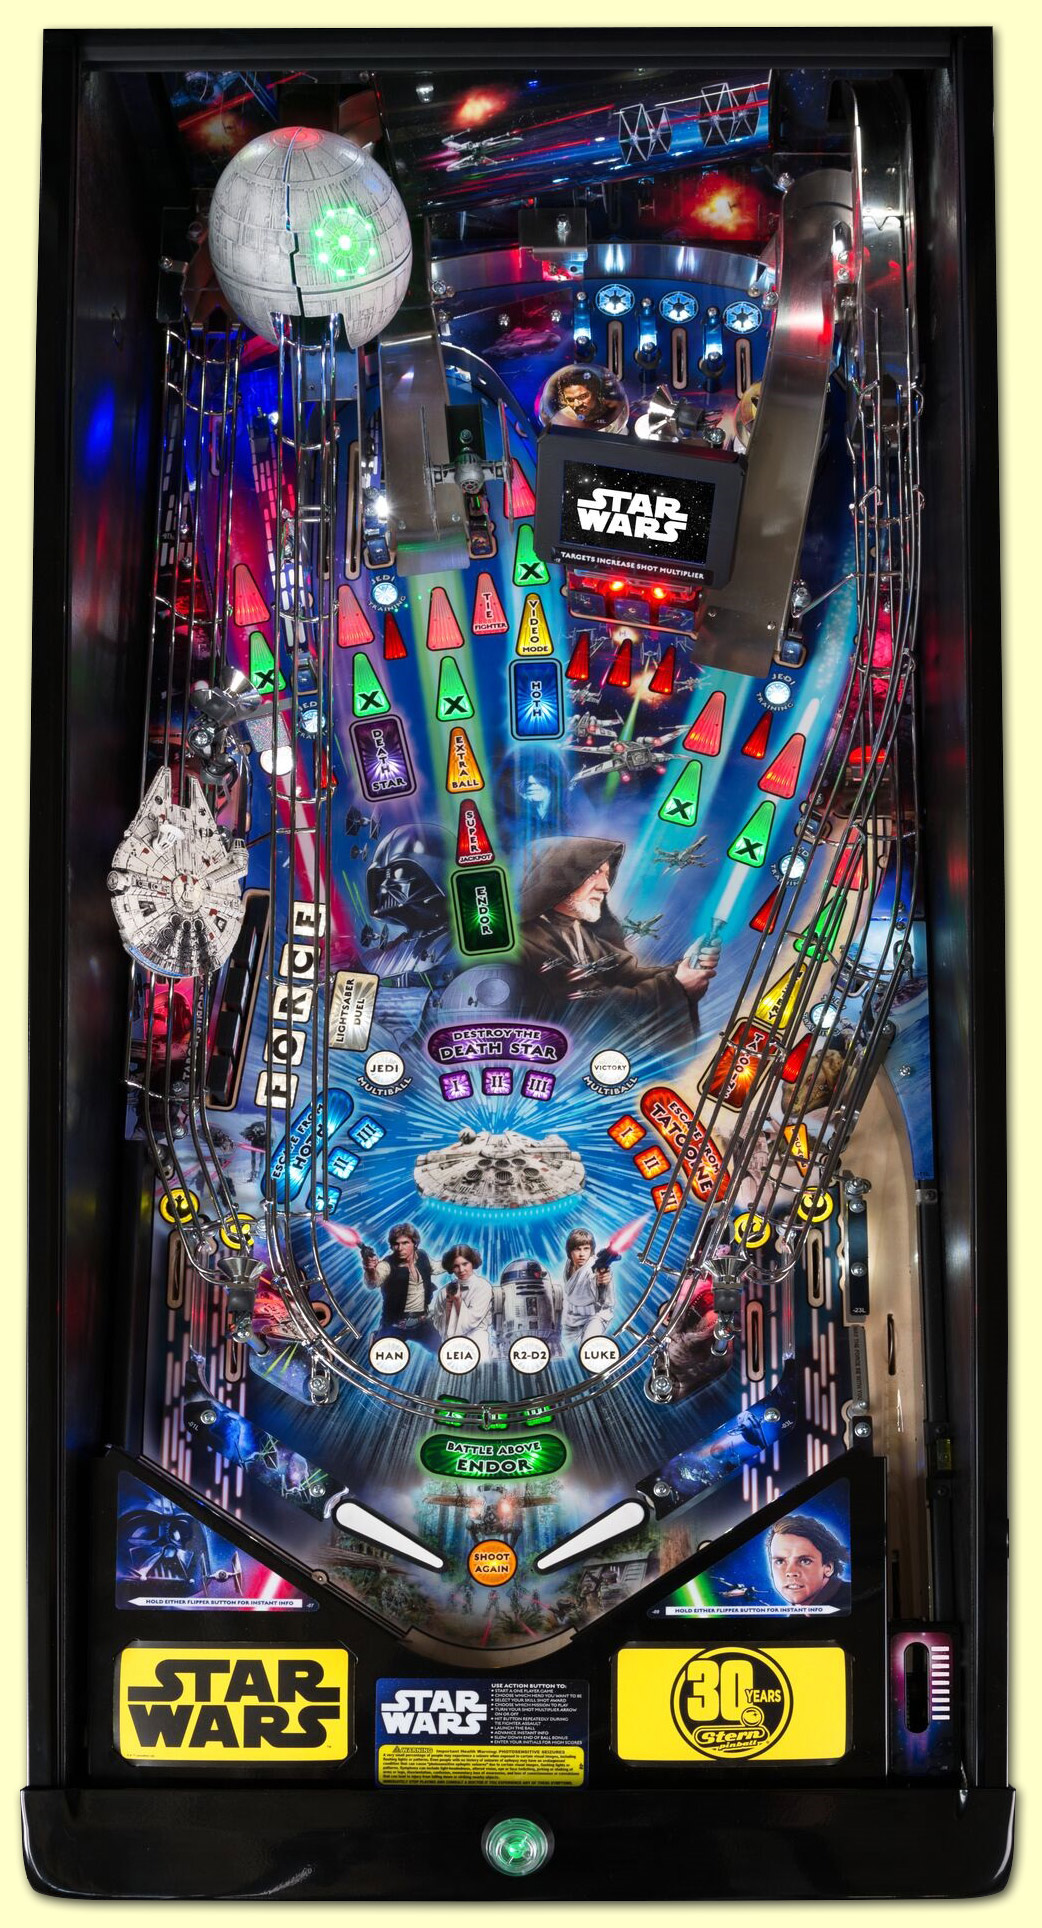 STAR WARS ANNOUNCED – Welcome to Pinball News – First & Free